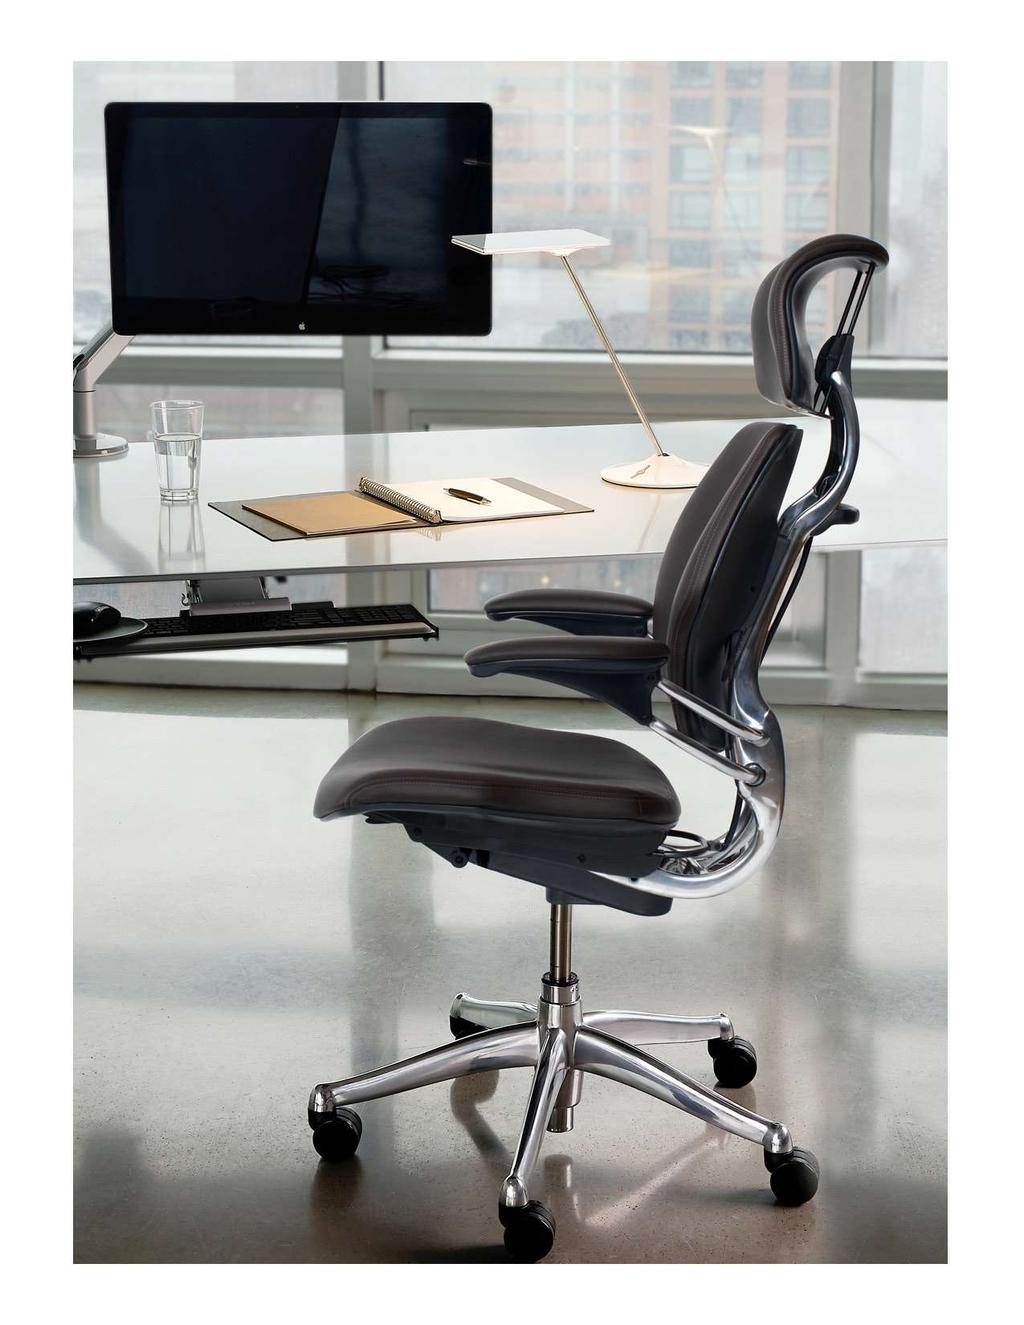 FREEDOM With Freedom, the knobs, levers and locks of current-generation task chairs have been replaced by intelligent mechanisms that automatically support the body as it moves from task to task.